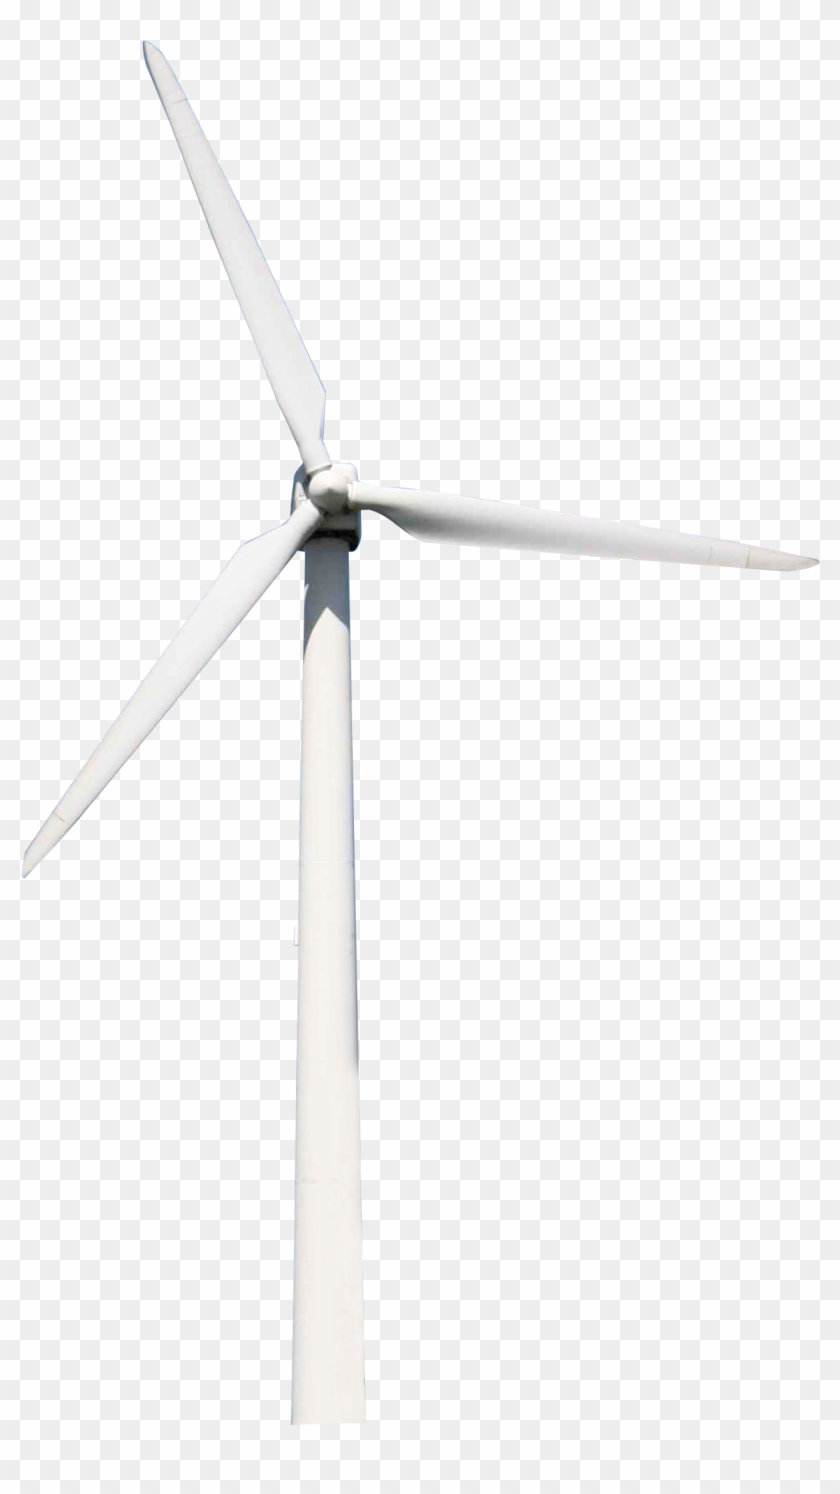 Windmill Png Transparent Image - Windmill Png Png Clipart #650116